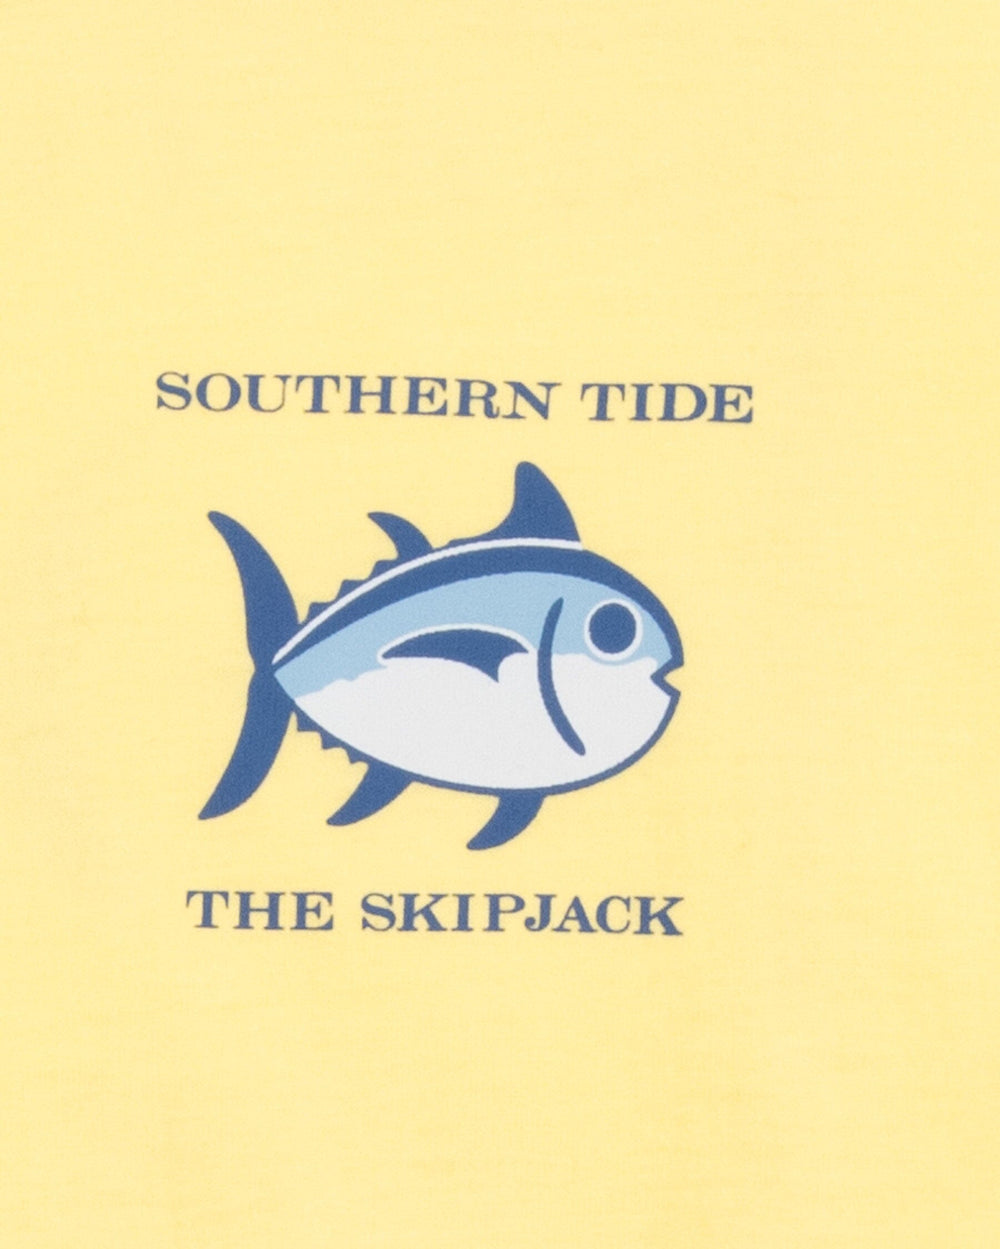 The detail view of the Southern Tide Original Skipjack Short Sleeve T-Shirt by Southern Tide - Tuscan Sun